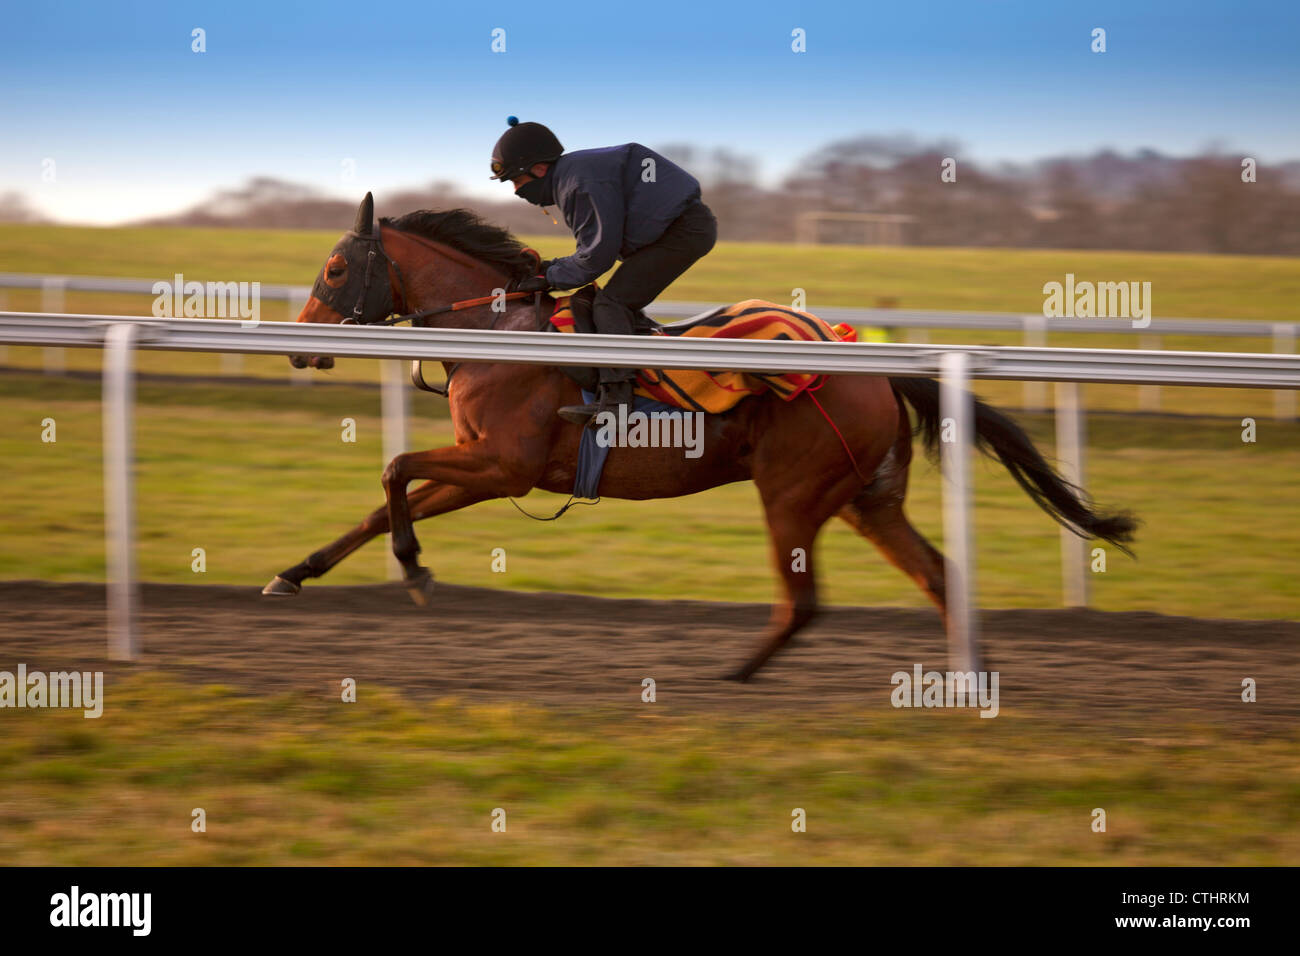 A racehorse galloping at full speed Stock Photo